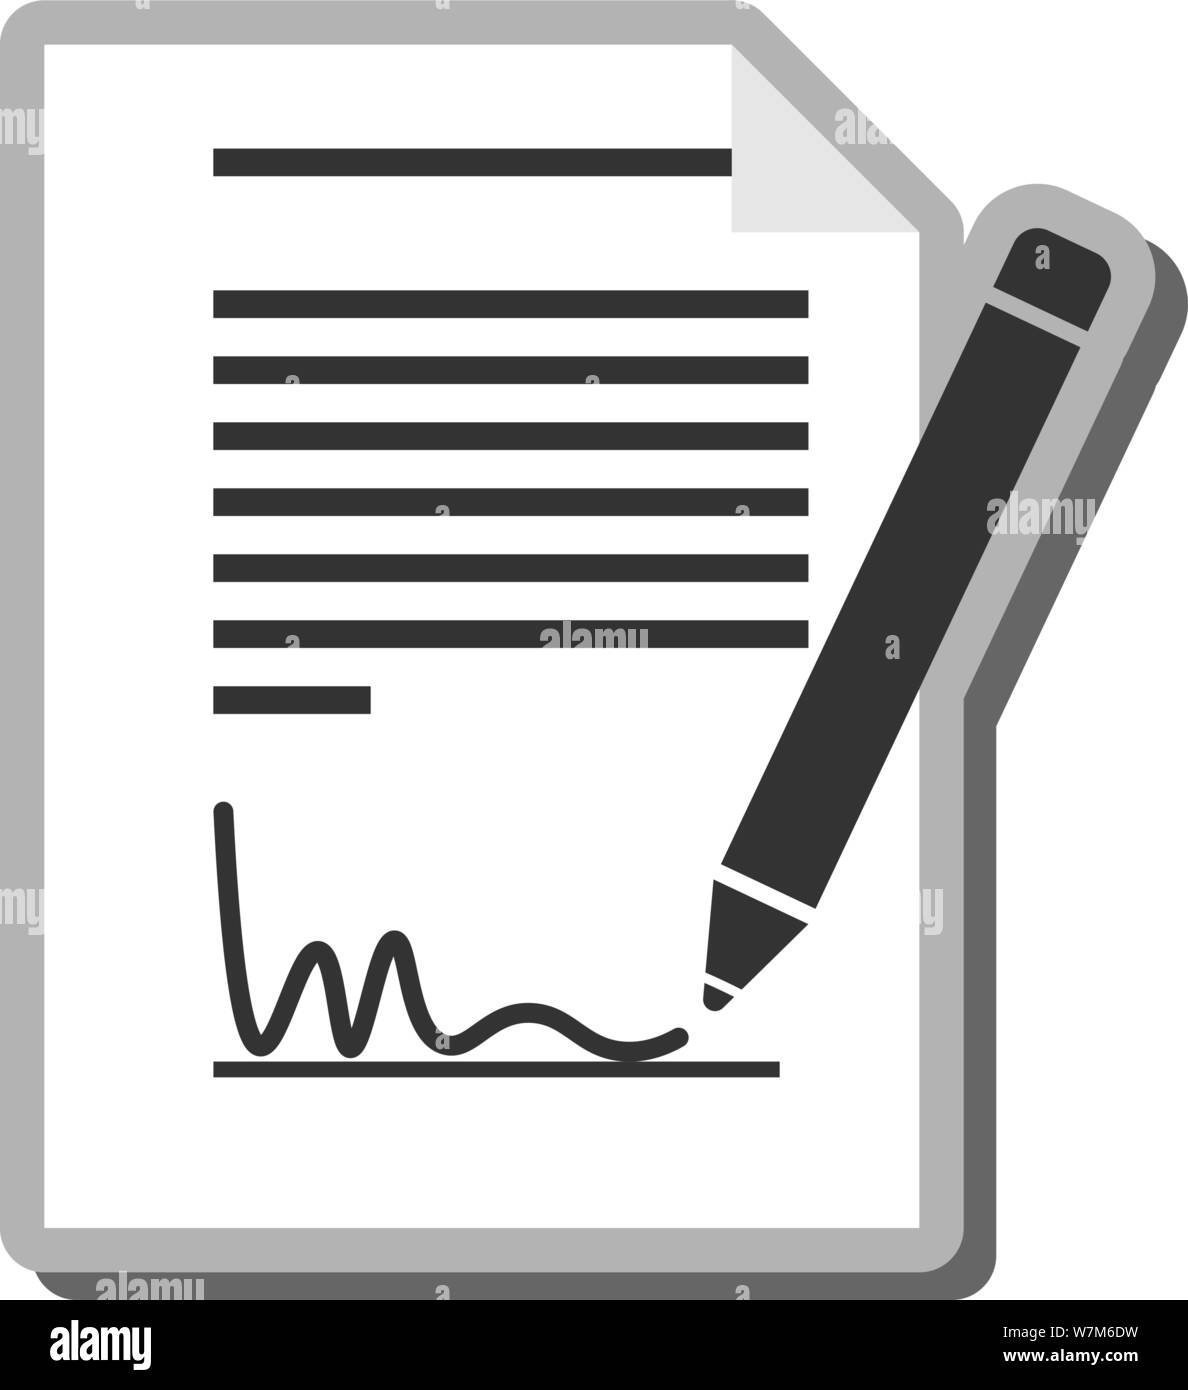 simple black and white signing document icon or symbol vector illustration Stock Vector